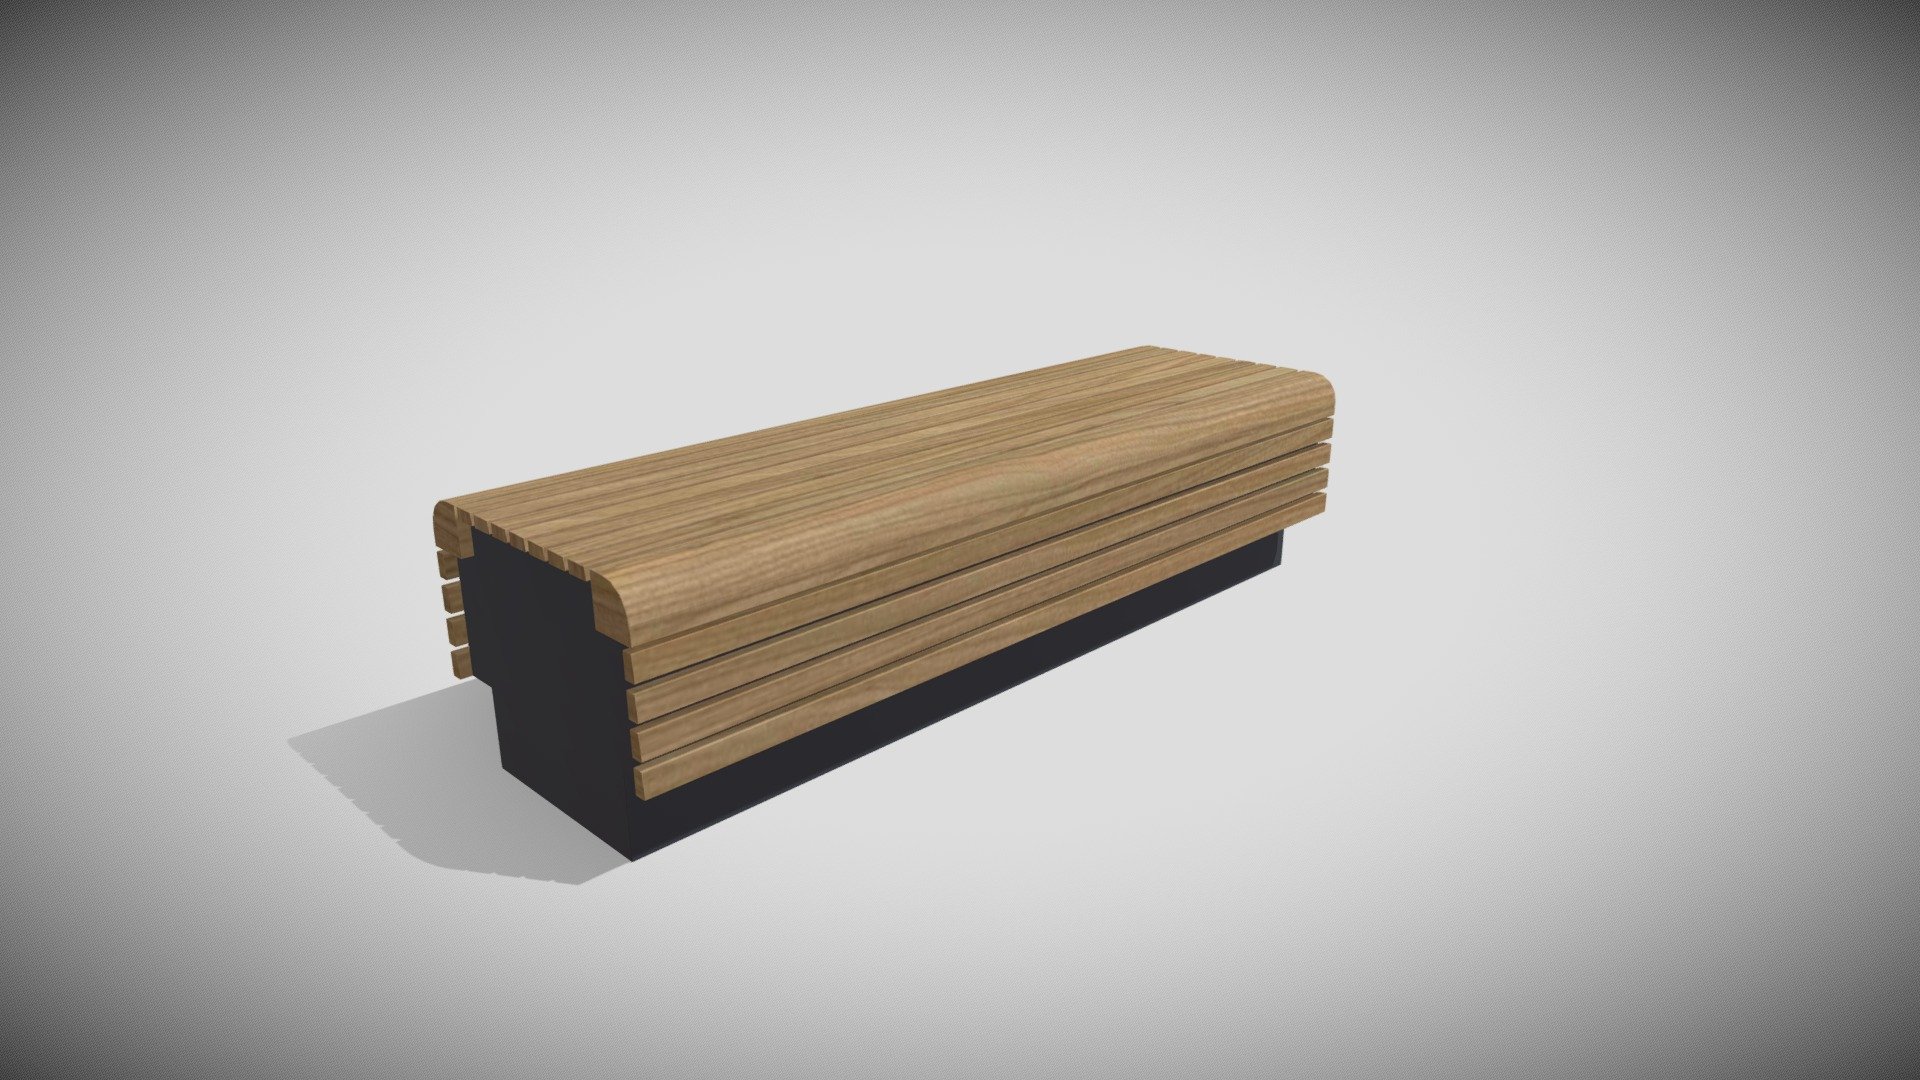 Detailed model of a Park Bench, modeled in Cinema 4D.The model was created using approximate real world dimensions.

The model has 532 polys and 496 vertices.

An additional file has been provided containing the original Cinema 4D project file, textures and other 3d export files such as 3ds, fbx and obj 3d model